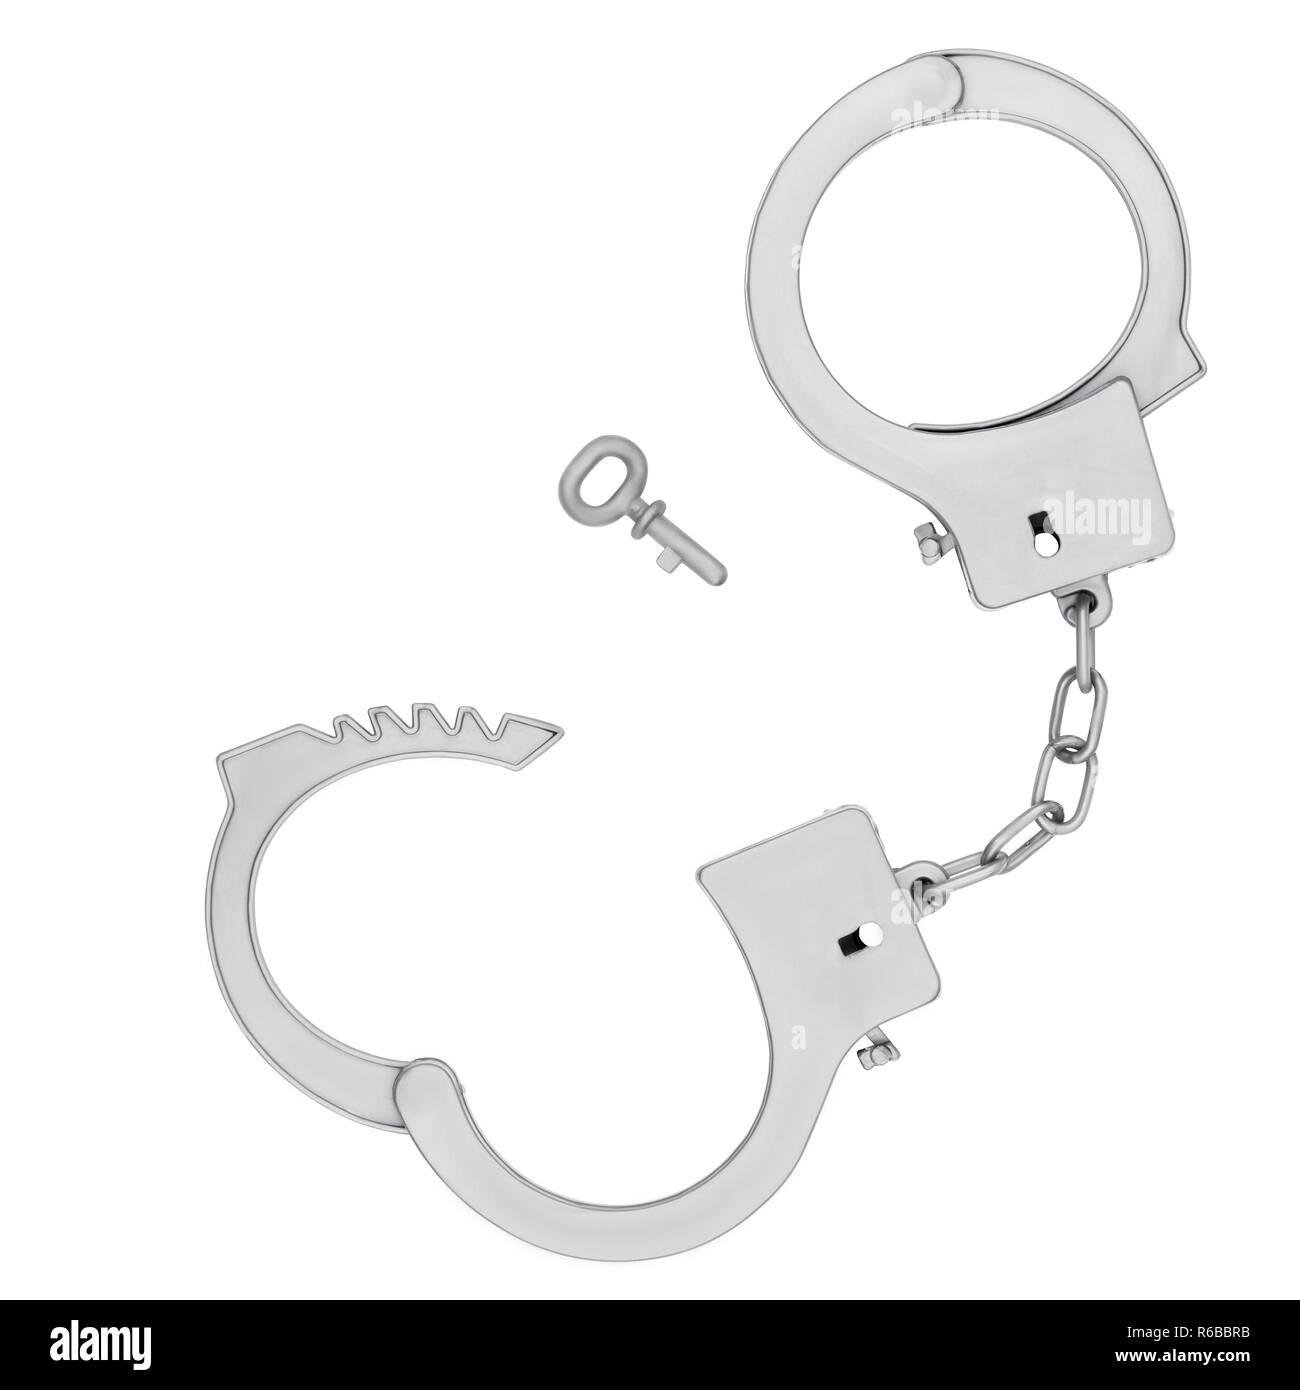 Isolated Silver Toy Police Hand Cuffs on White Background Stock Photo